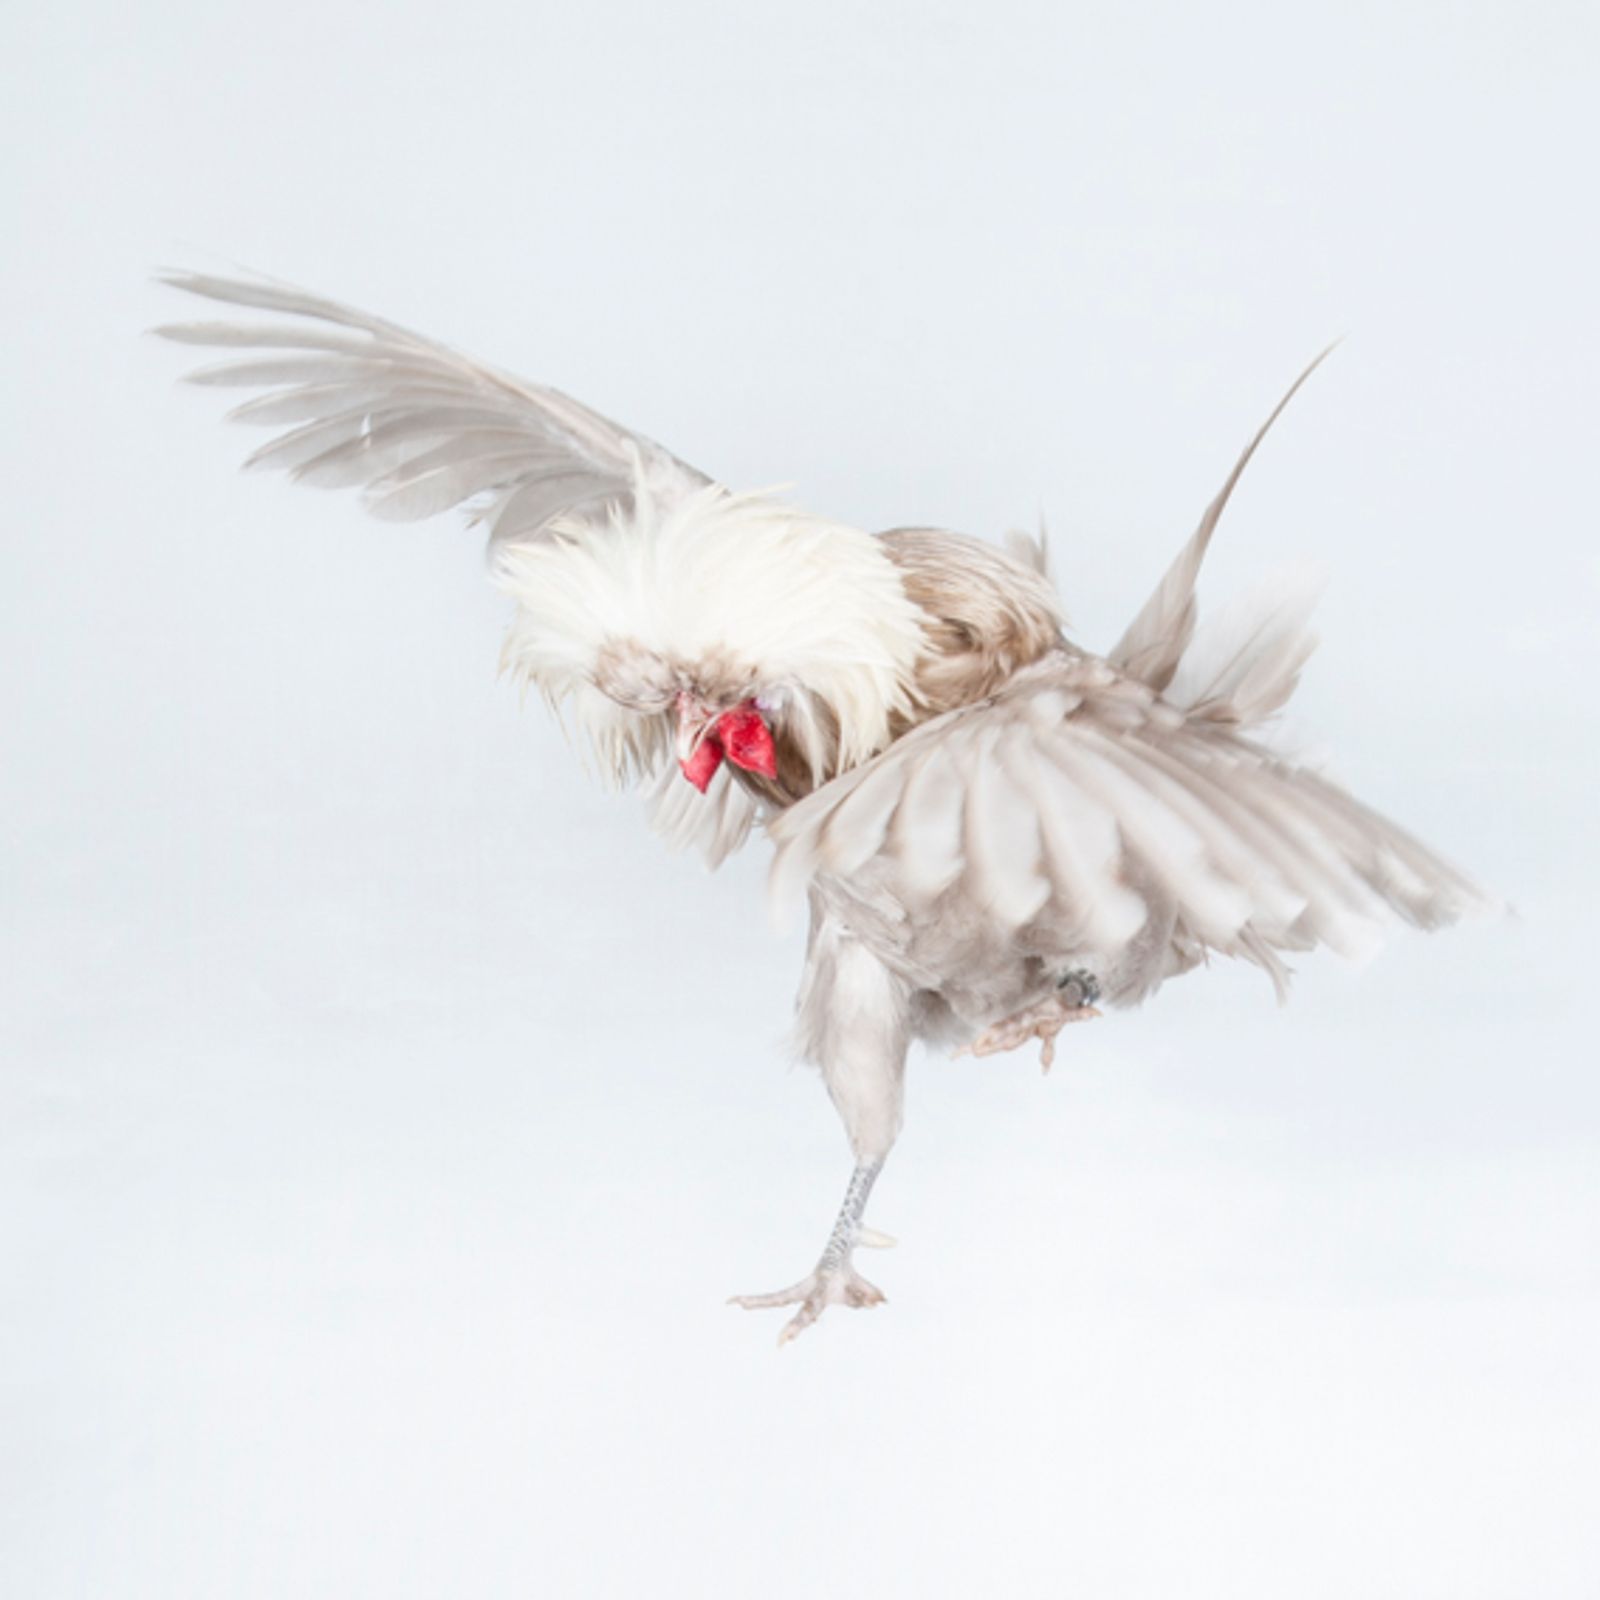 © Emanuela Colombo - Image from the Chickens photography project